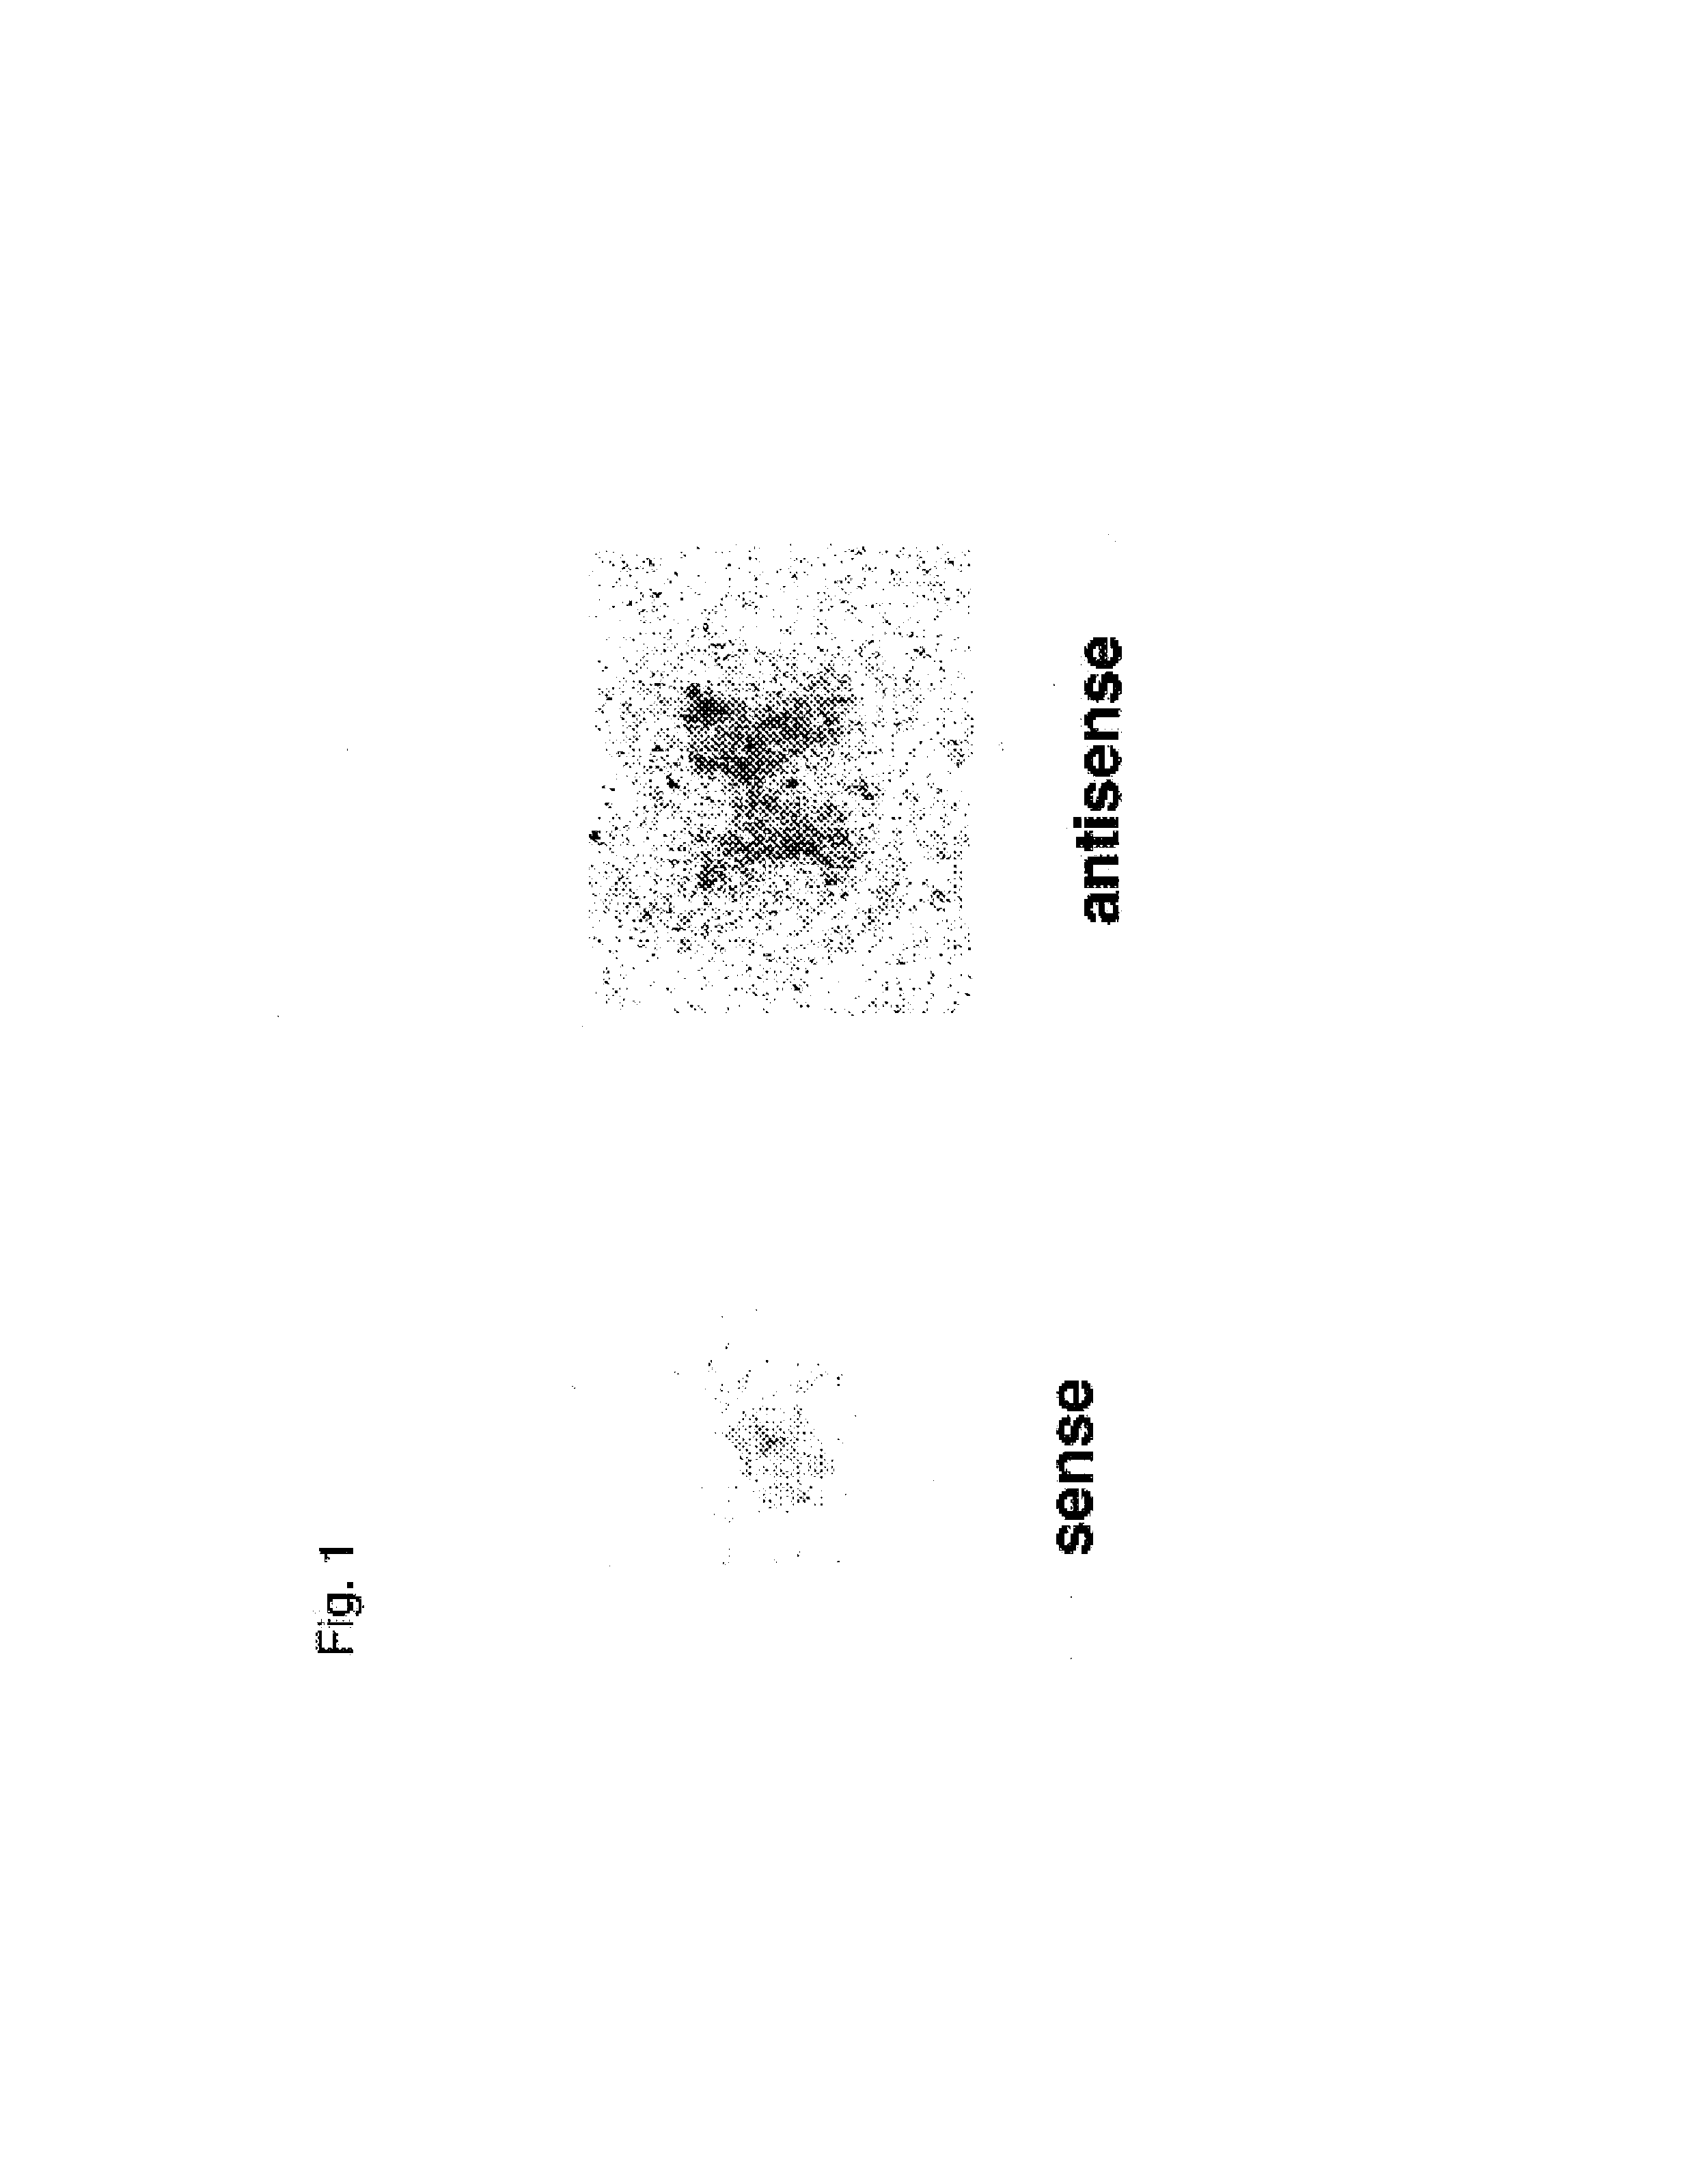 Method for alleviating pain using sphingosine-1-phosphate and related compounds, and assays for identifying such compounds